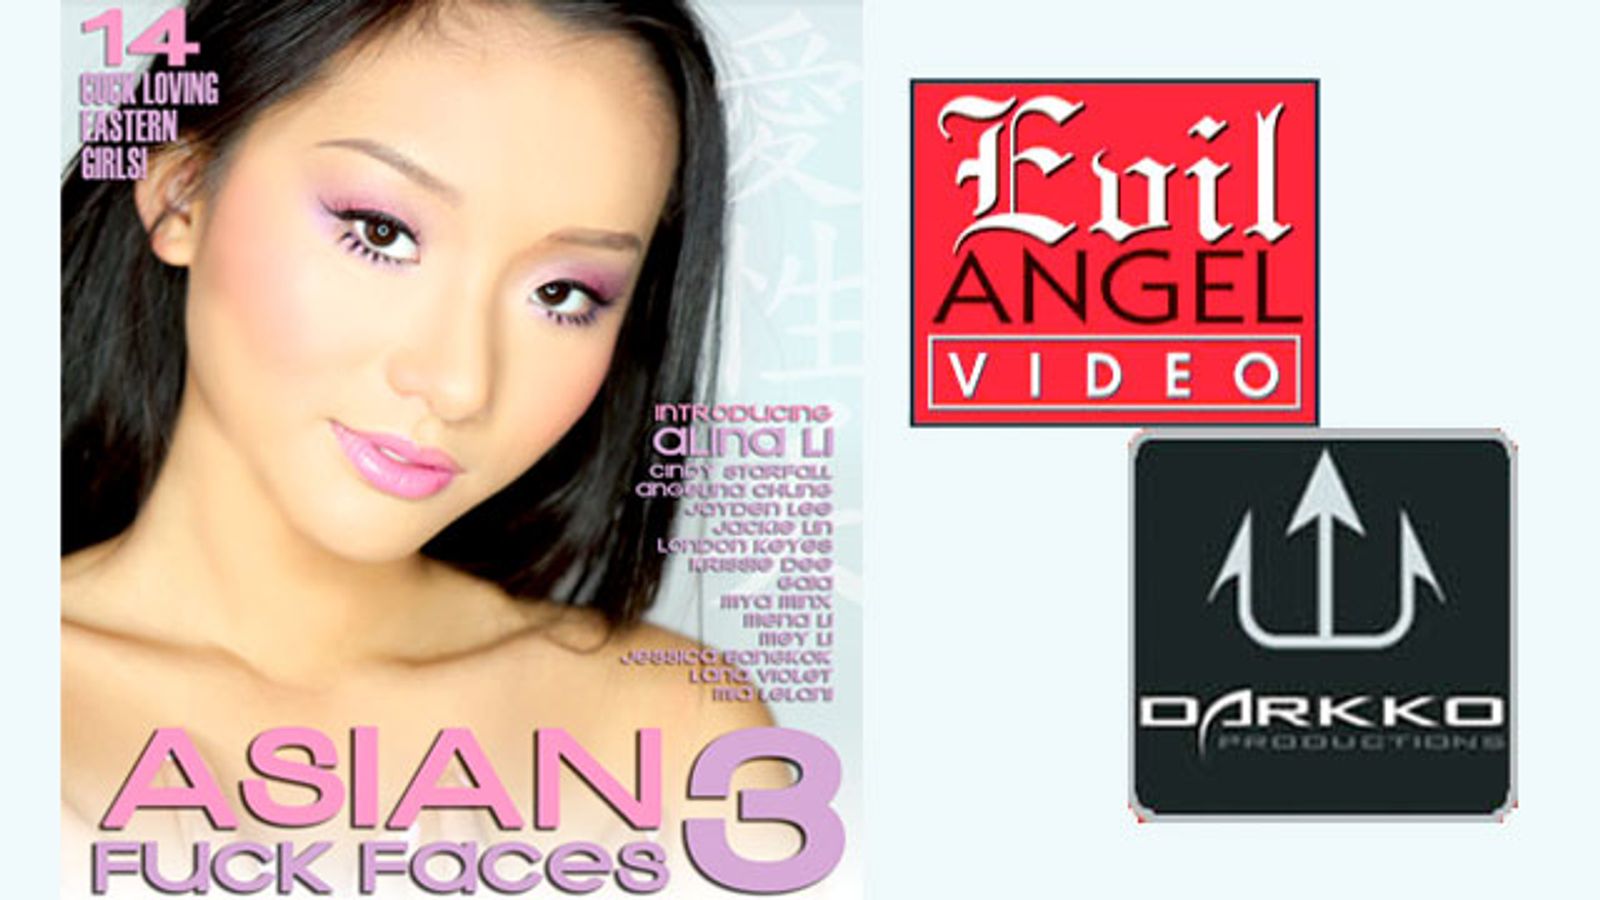 Darkko Releases 'Asian Fuck Faces 3' With Evil Angel